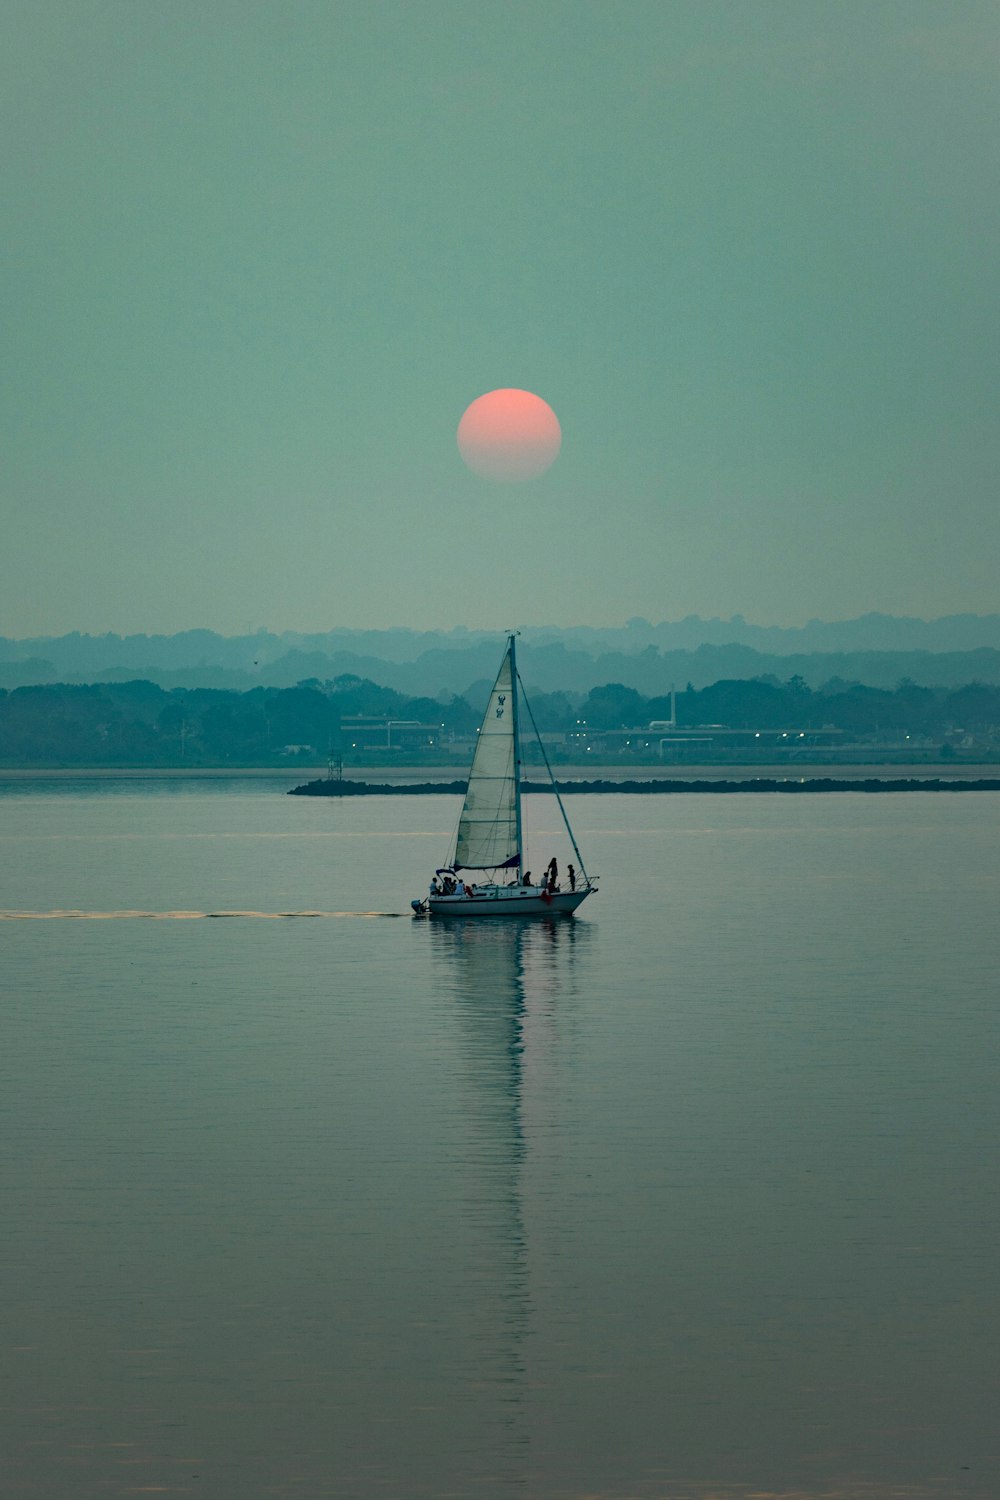 a sailboat is sailing in a large body of water